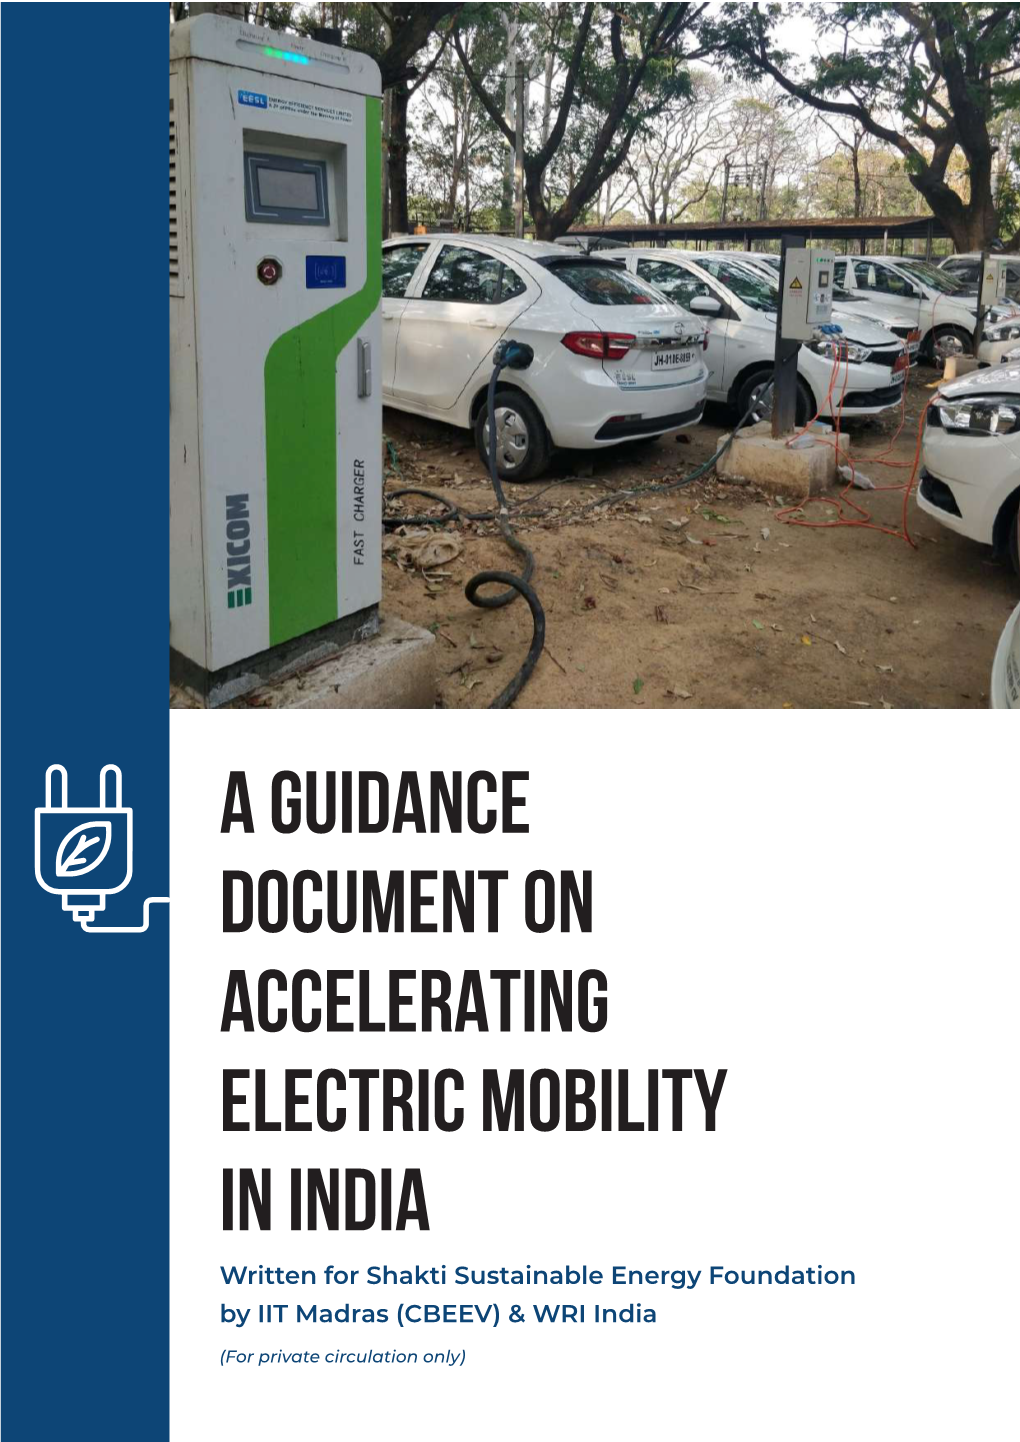 A GUIDANCE DOCUMENT on ACCELERATING ELECTRIC MOBILITY in INDIA Written for Shakti Sustainable Energy Foundation by IIT Madras (CBEEV) & WRI India